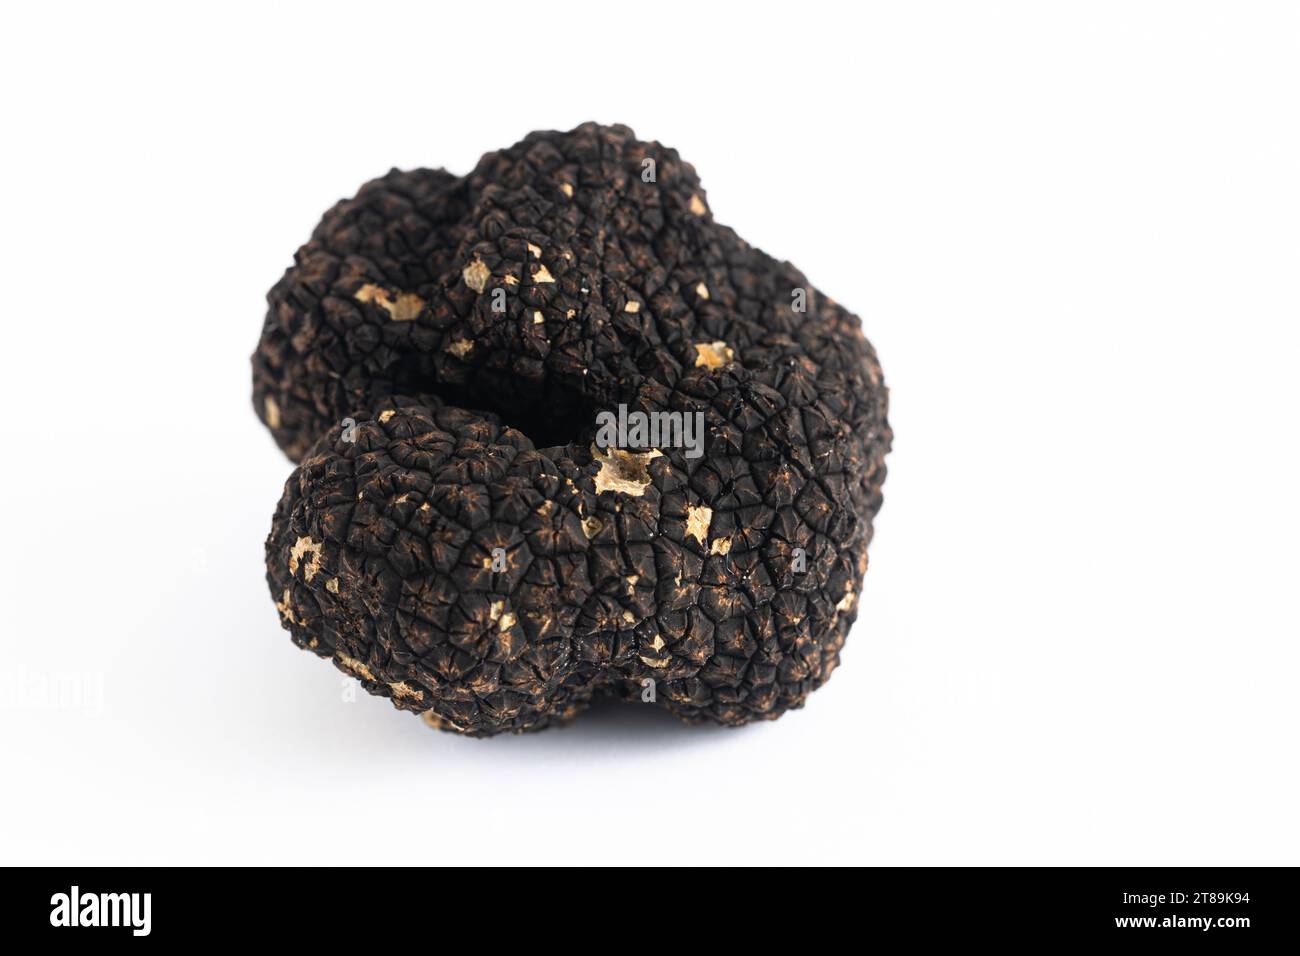 Exquisite Black Truffle on a Clean White Surface Stock Photo